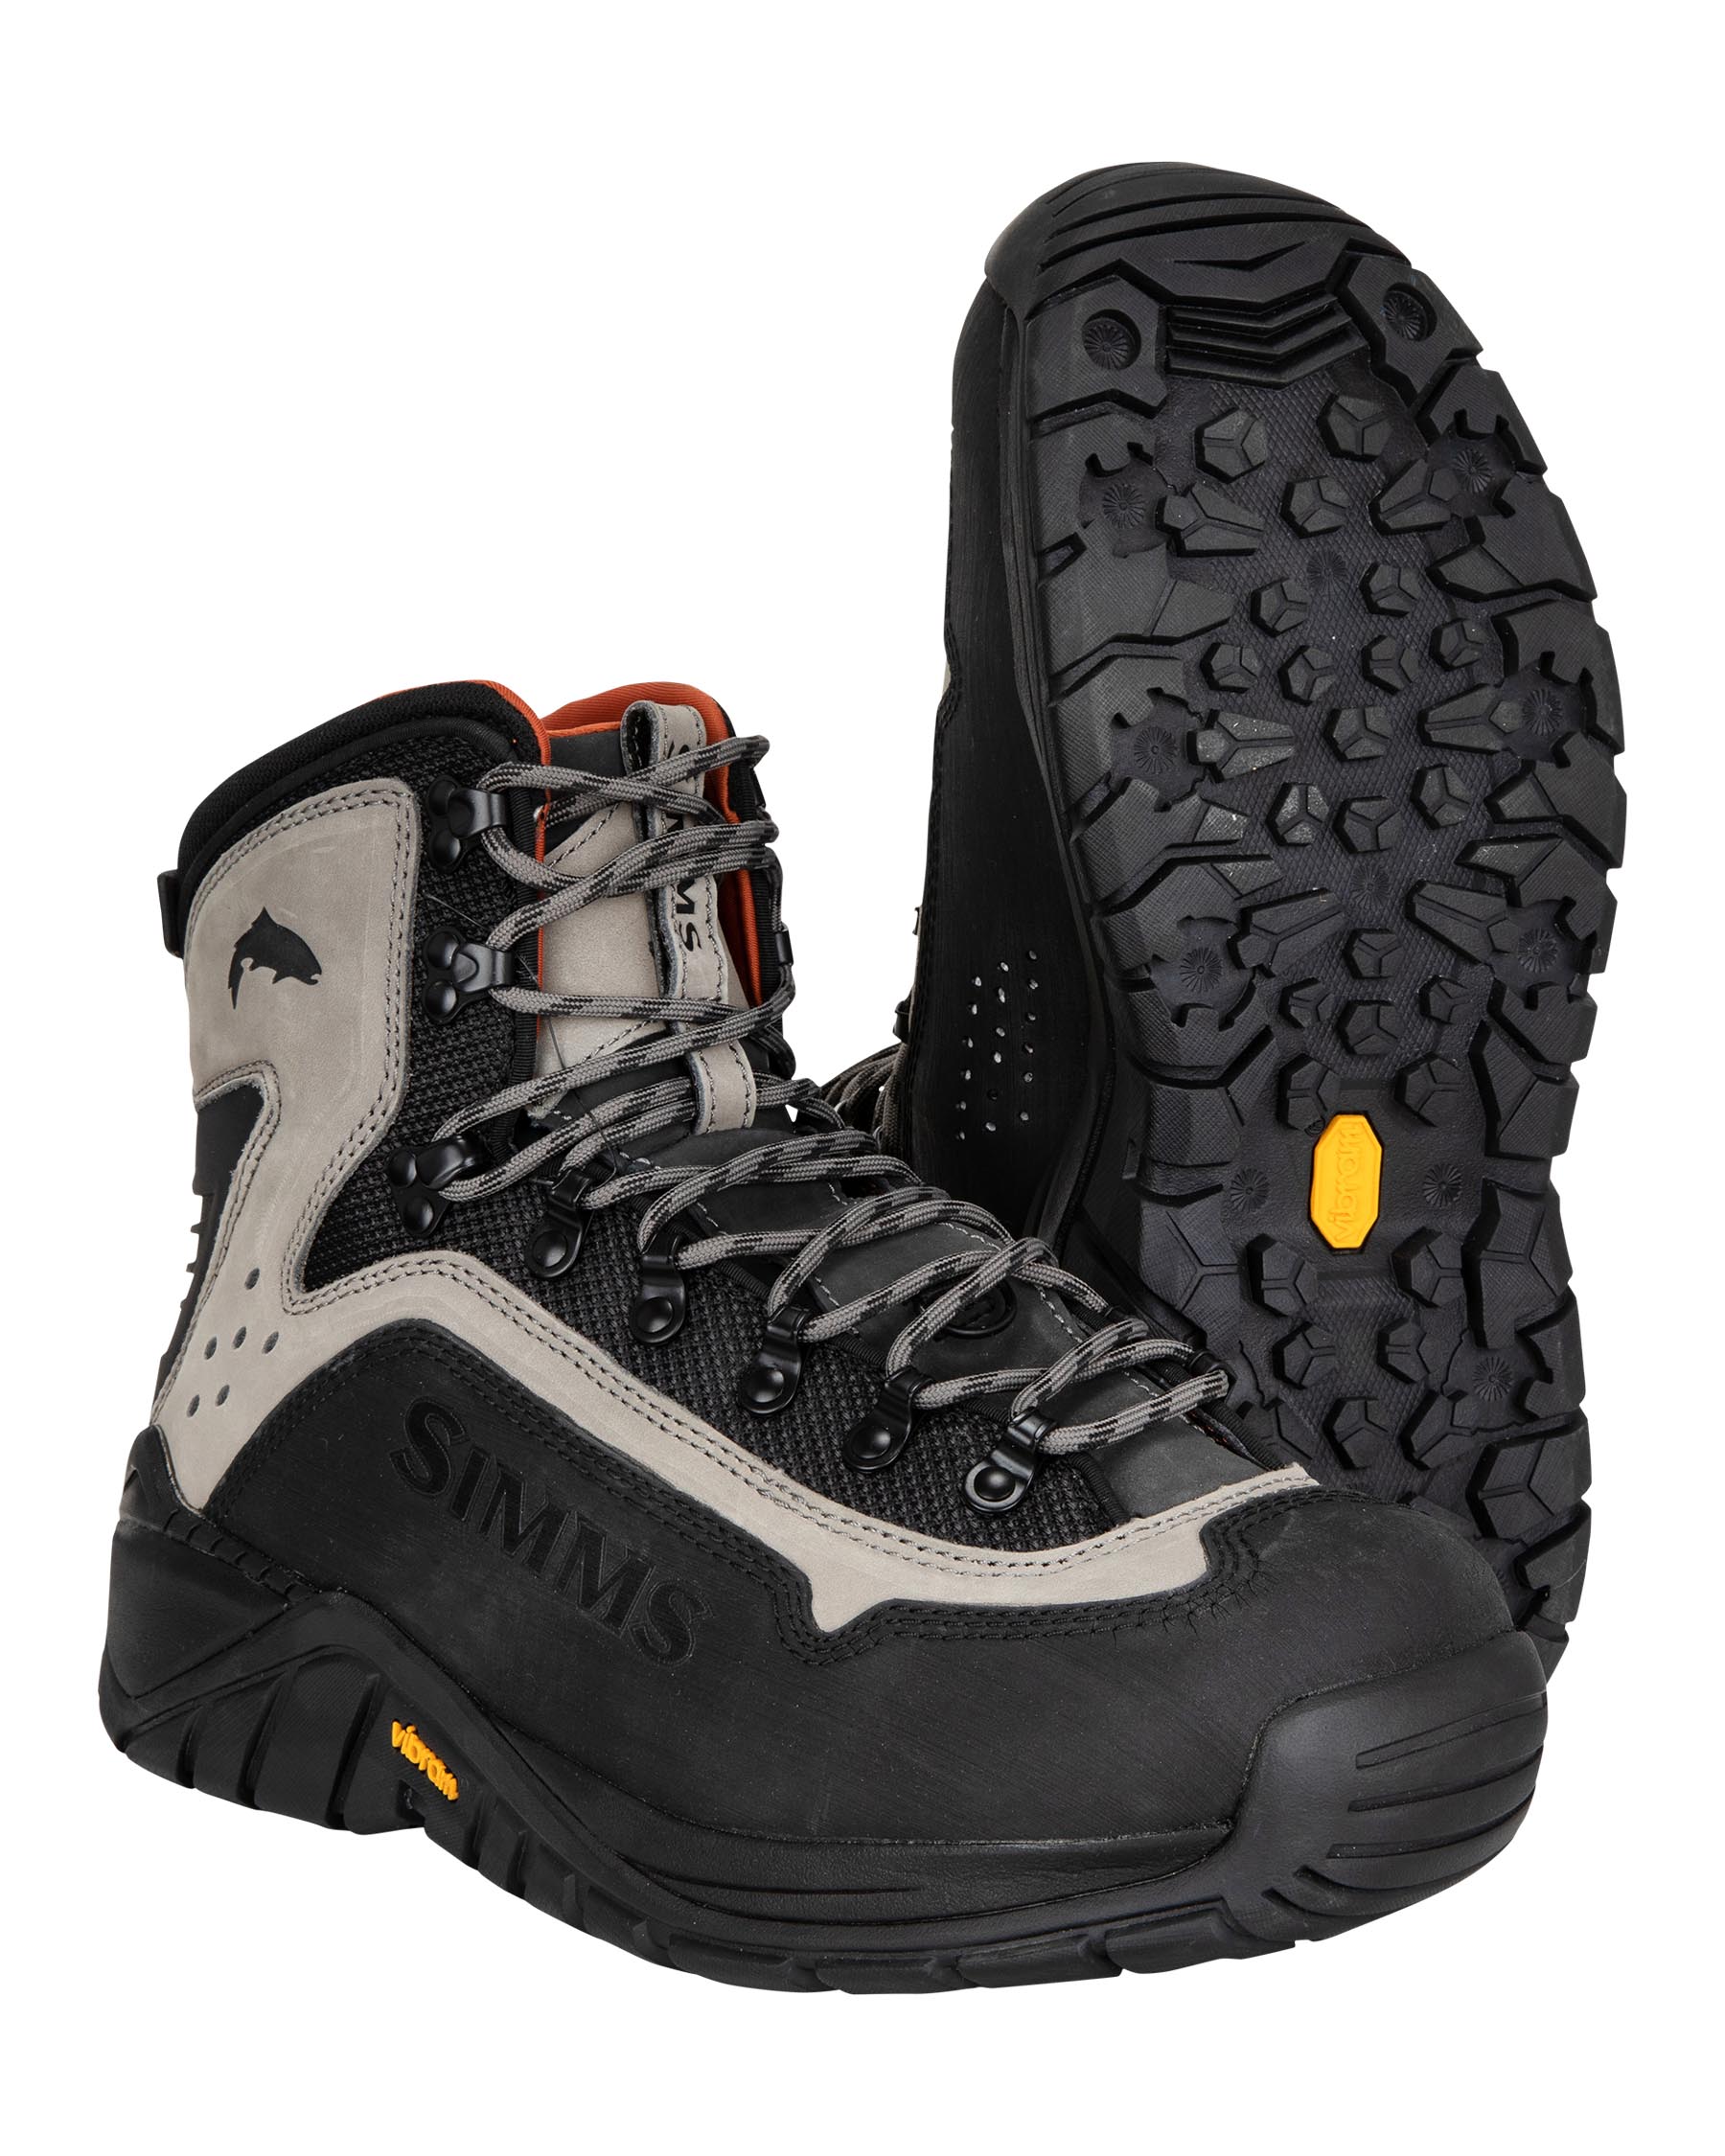 M's G3 Guide Wading Boots - Vibram Soles